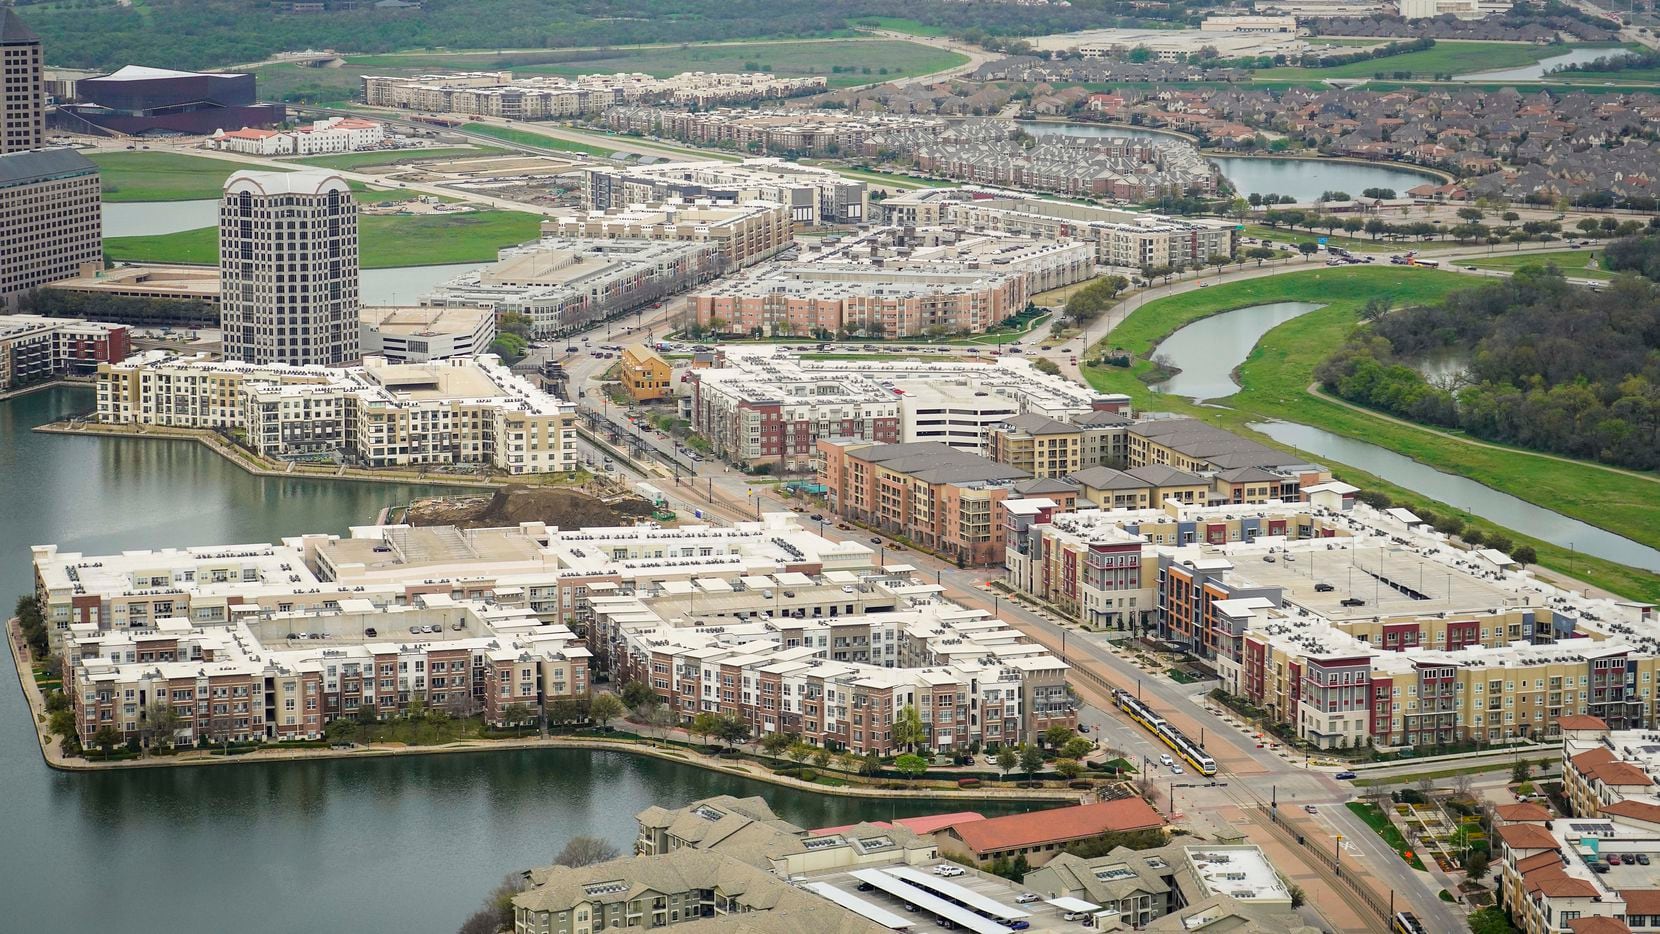 A new museum traces the story of Irving, from the early pioneers through modern day and includes the development of Las Colinas, pictured here.